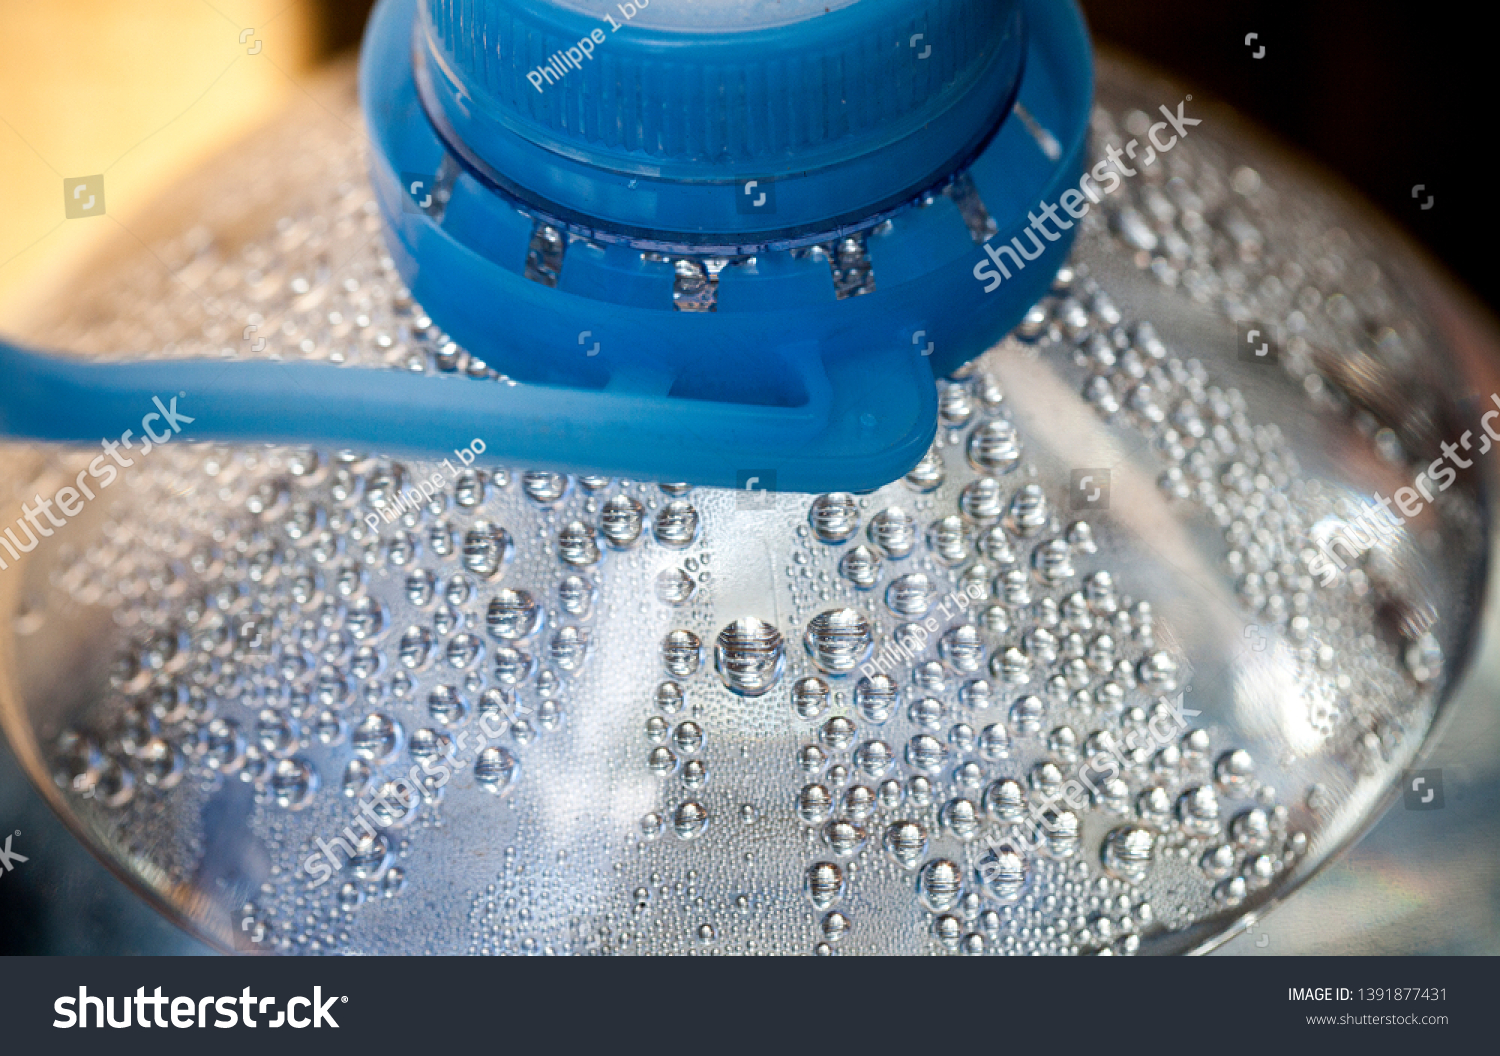 Download Condensation Water Plastic Bottle Exposed Sun Backgrounds Textures Stock Image 1391877431 Yellowimages Mockups